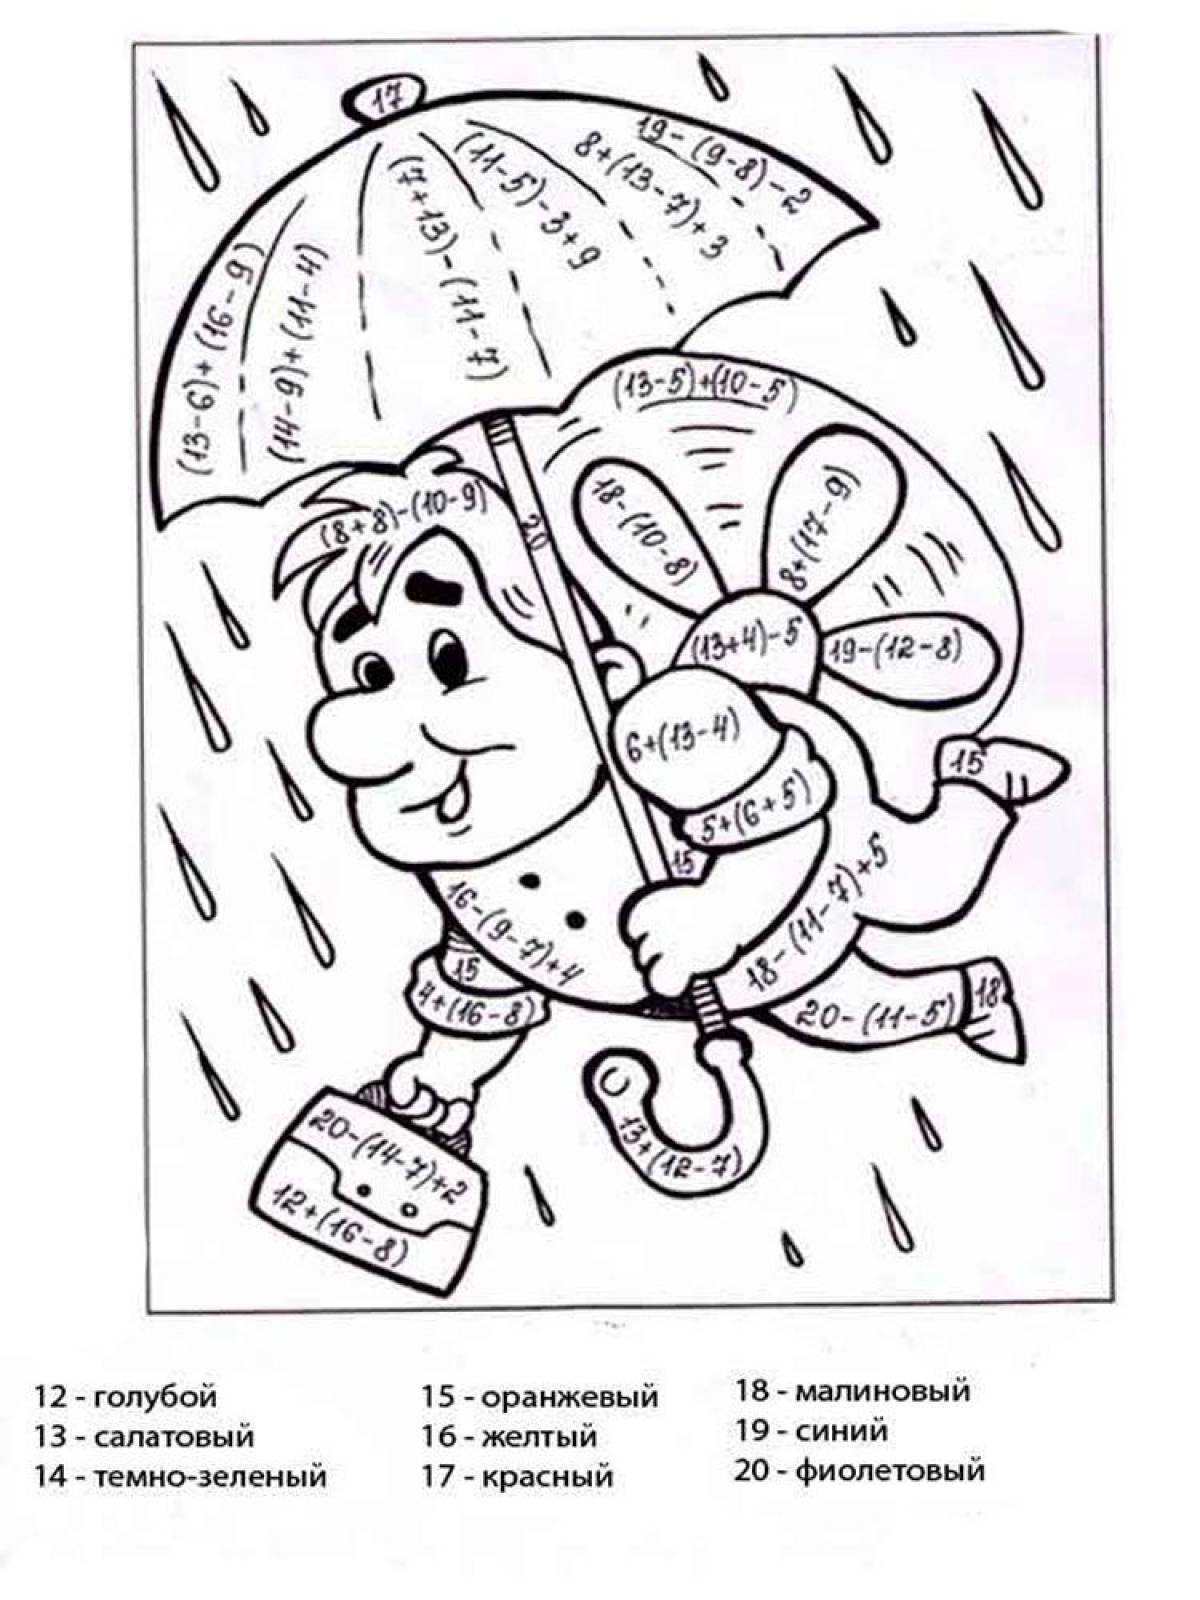 Coloring pages for grade 1 with examples of carlson under an umbrella